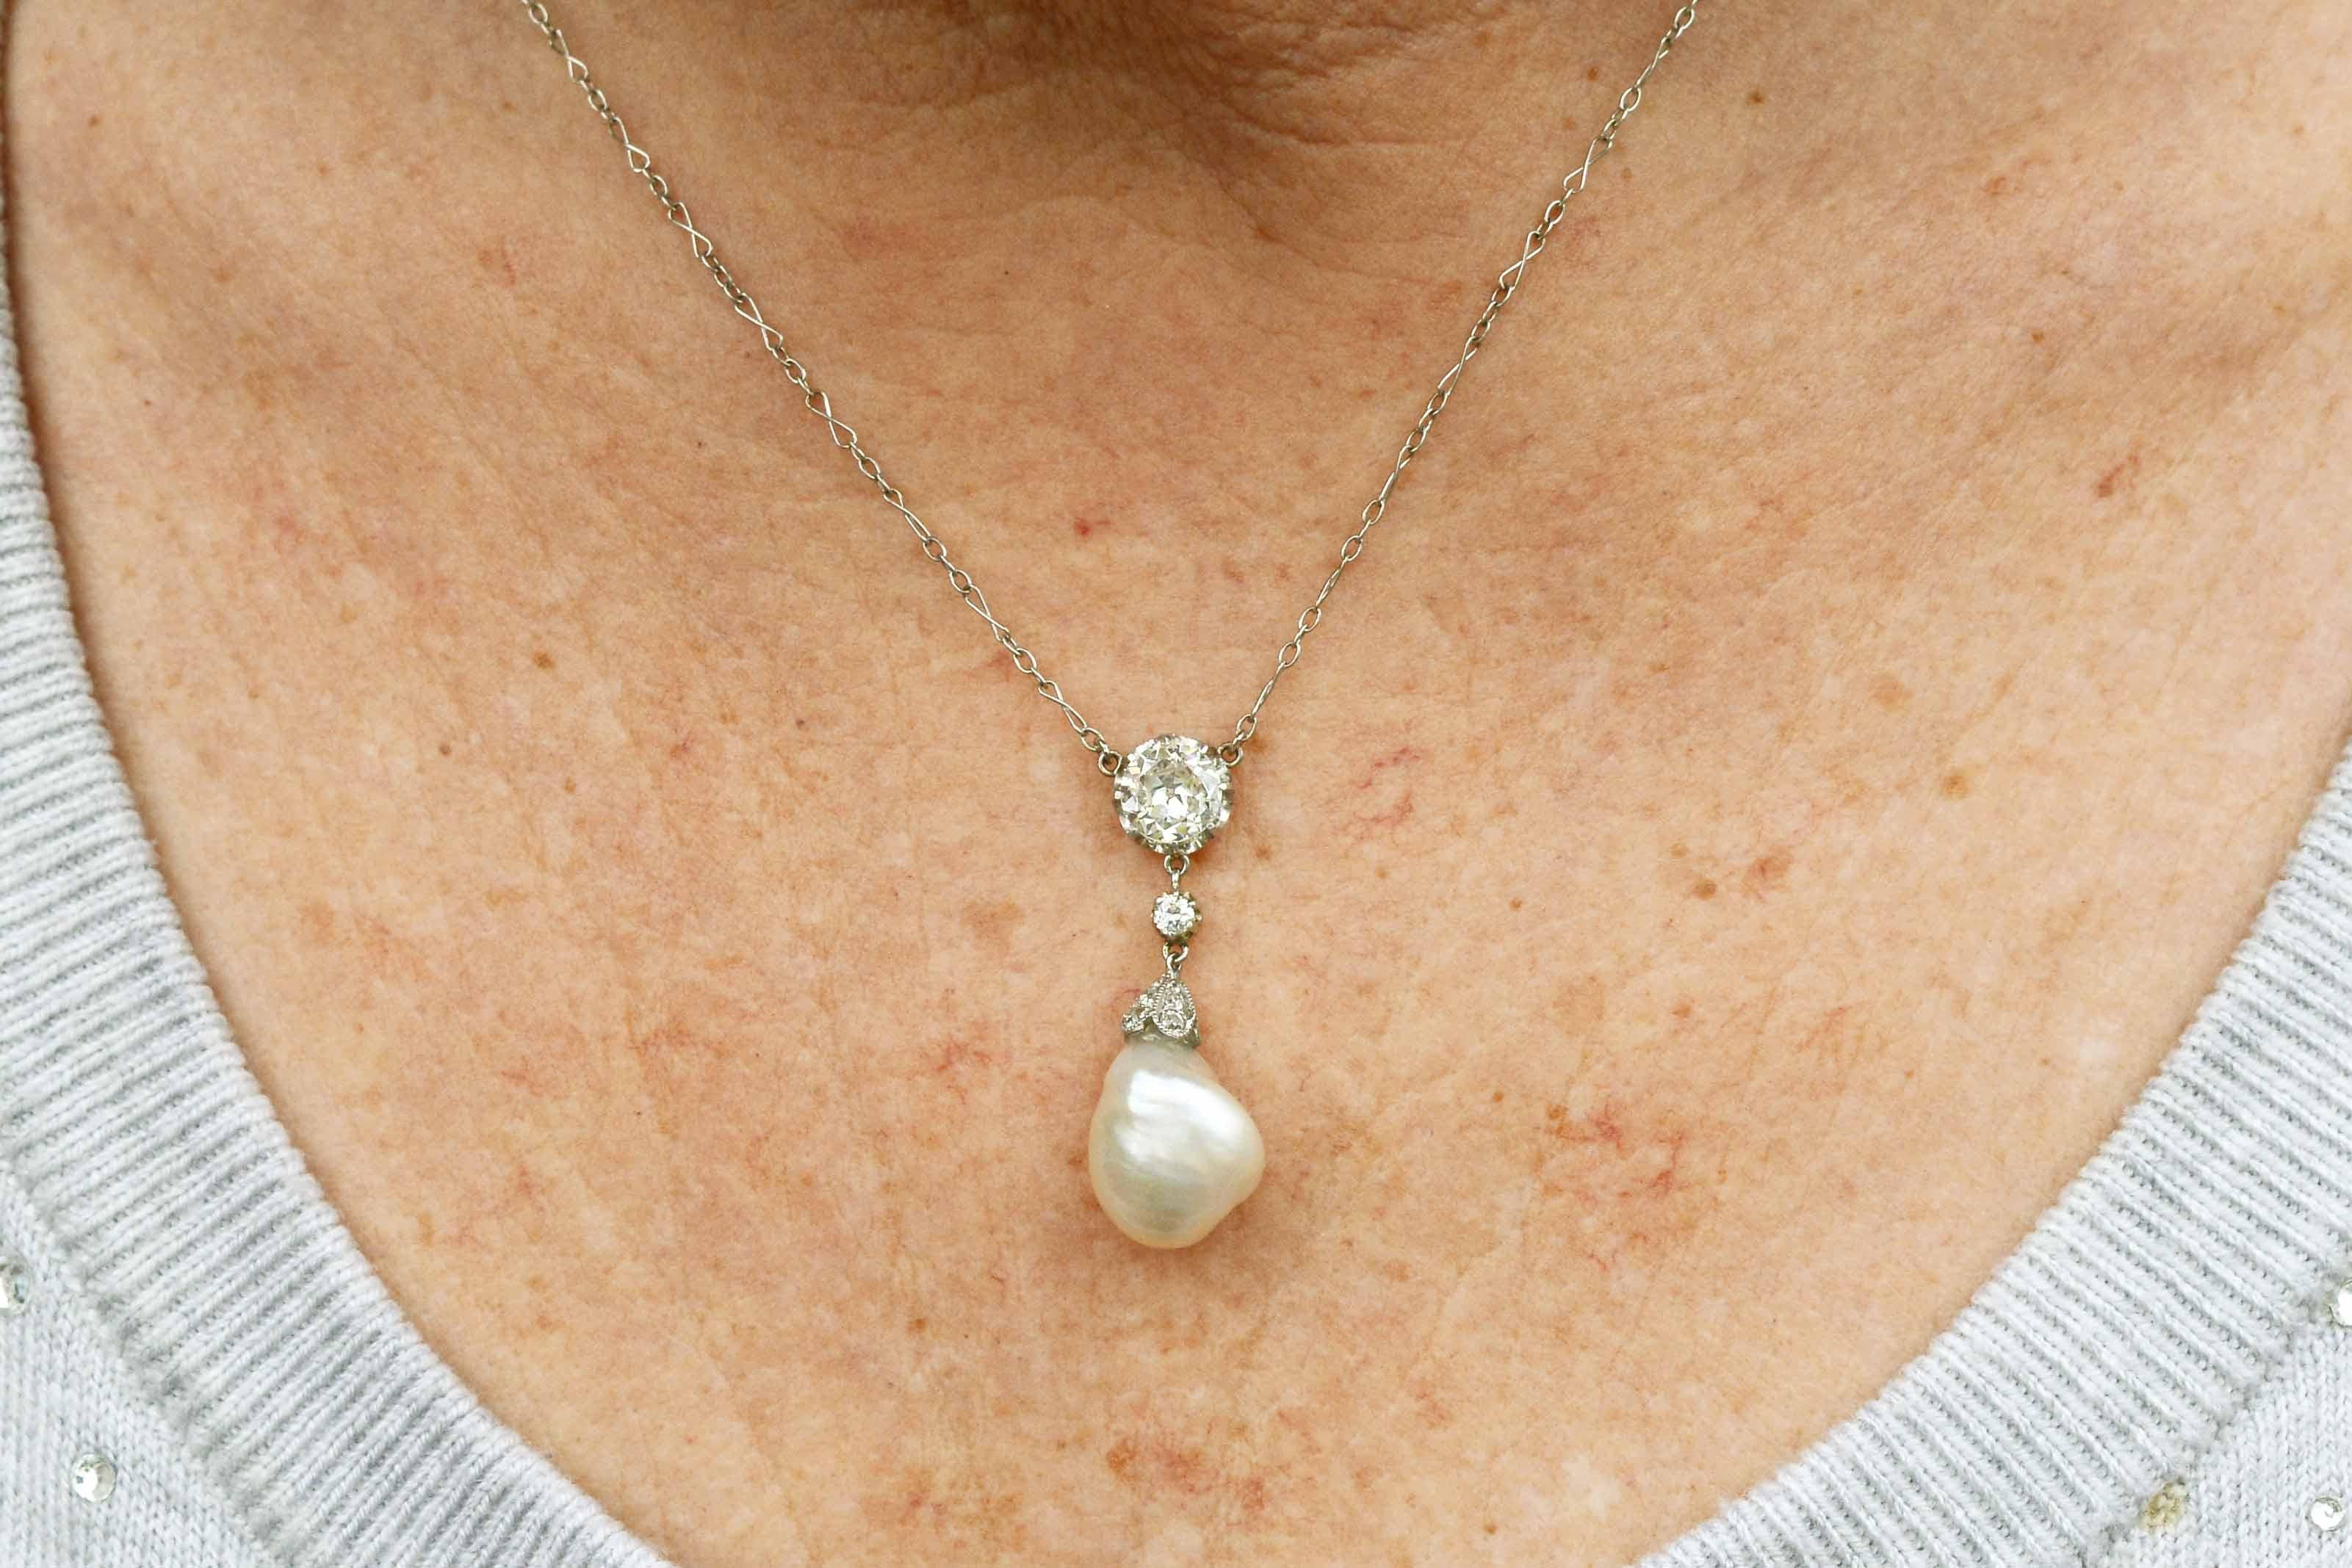 The Nampa antique natural pearl diamond pendant necklace centers on an intriguing, lustrous, large and rare GIA certified South Sea pearl. Suspended by an over 1 carat diamond solitaire, the lavalier drop style dating to the Belle Epoque or